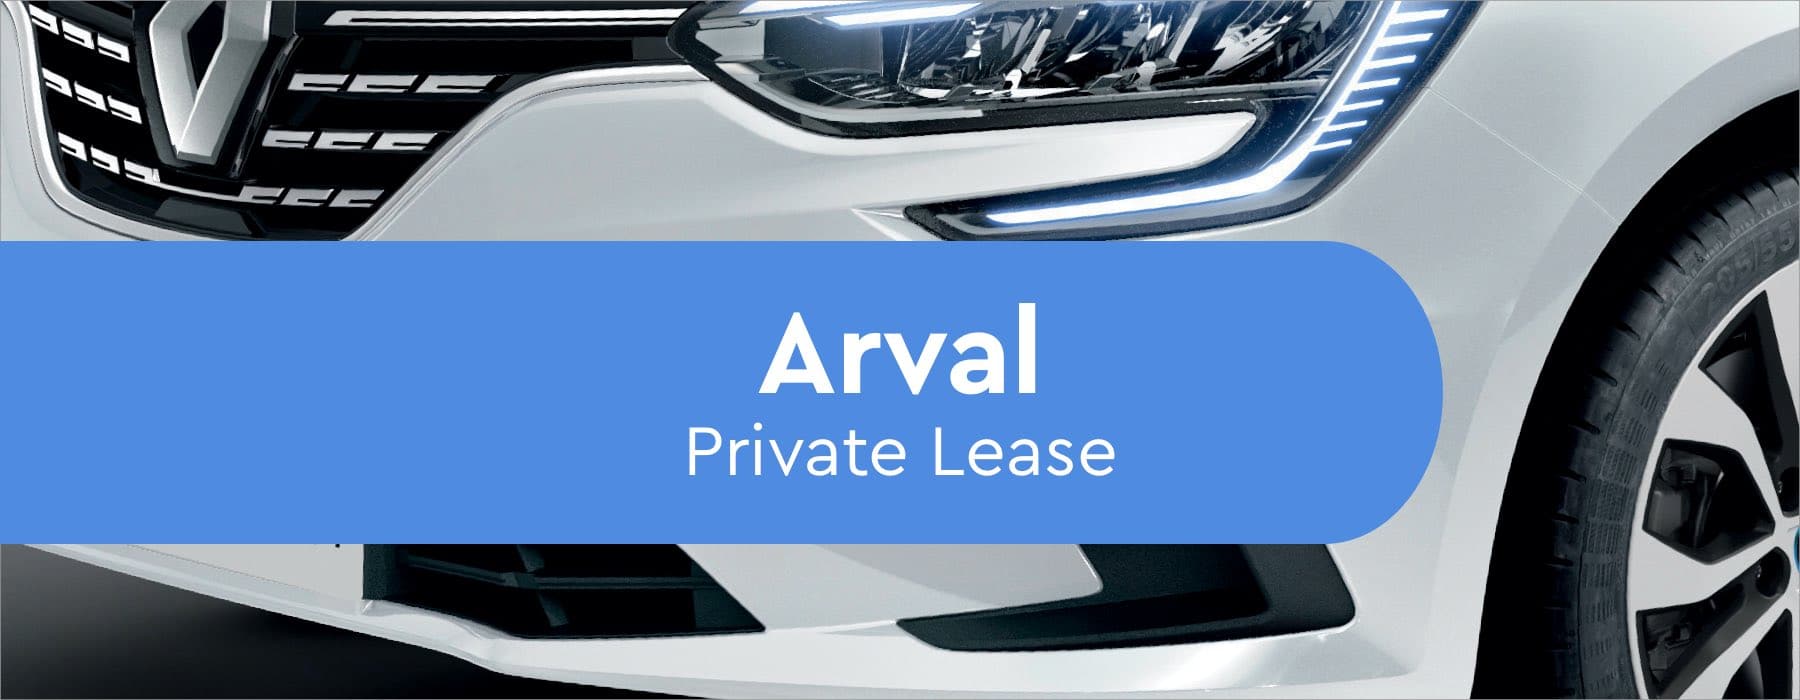 arval Private Lease